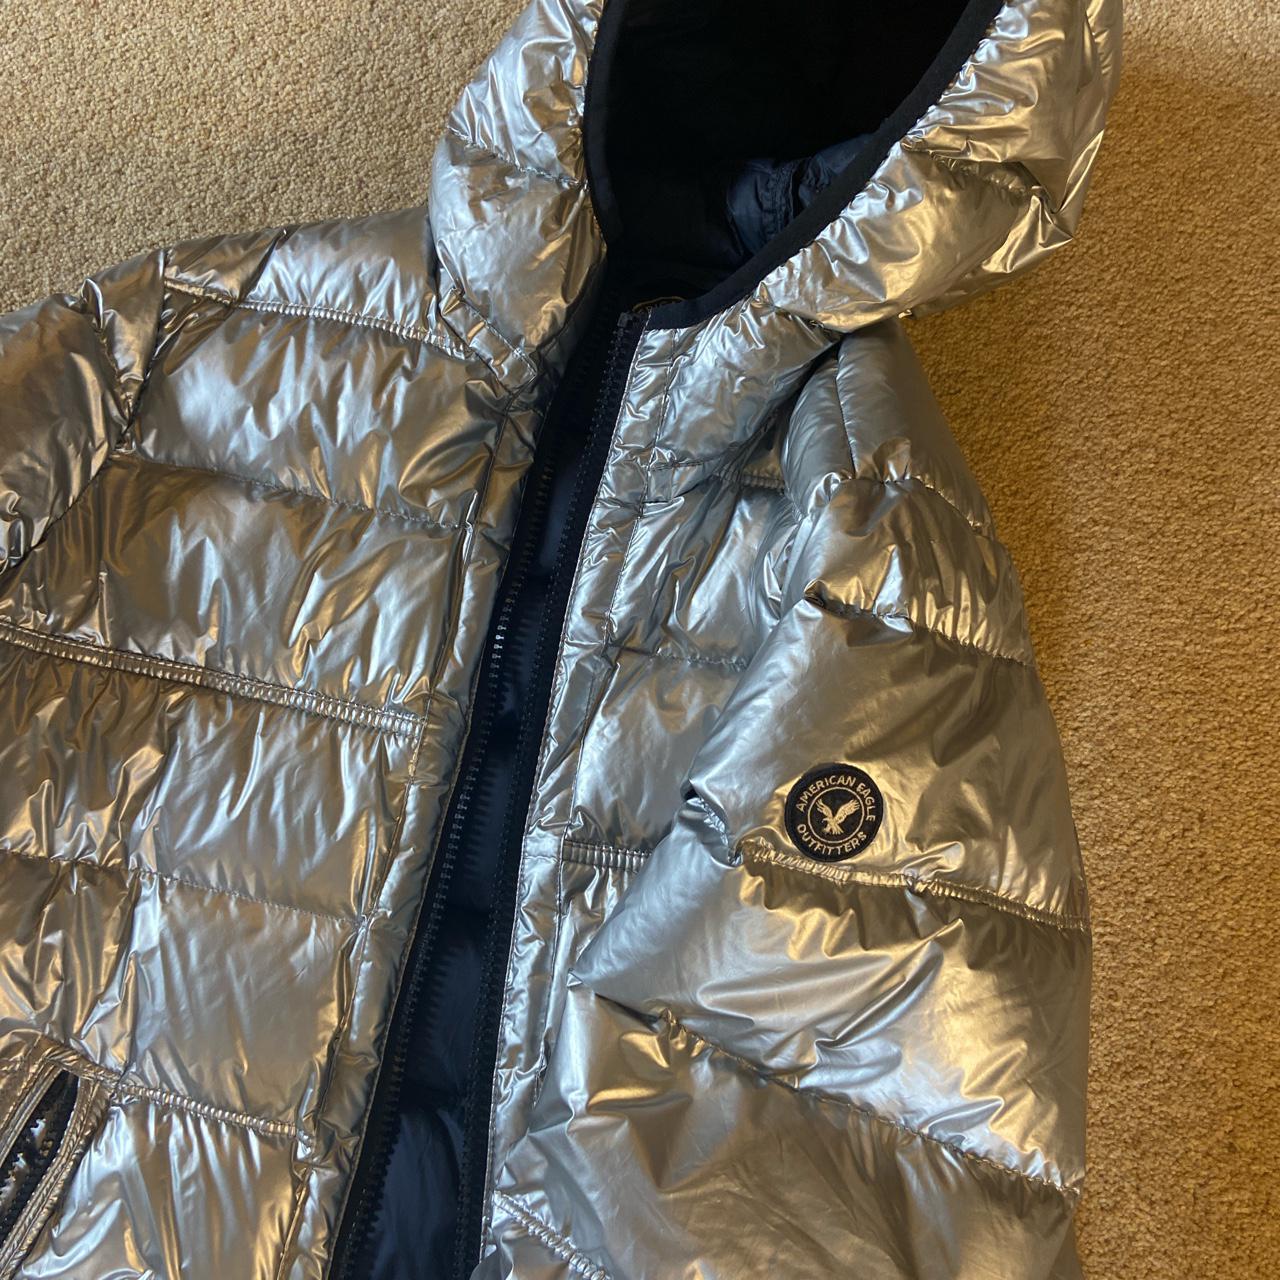 American Eagle Outfitters, Jackets & Coats, American Eagle Silver Puffer  Coat Womens Size Small